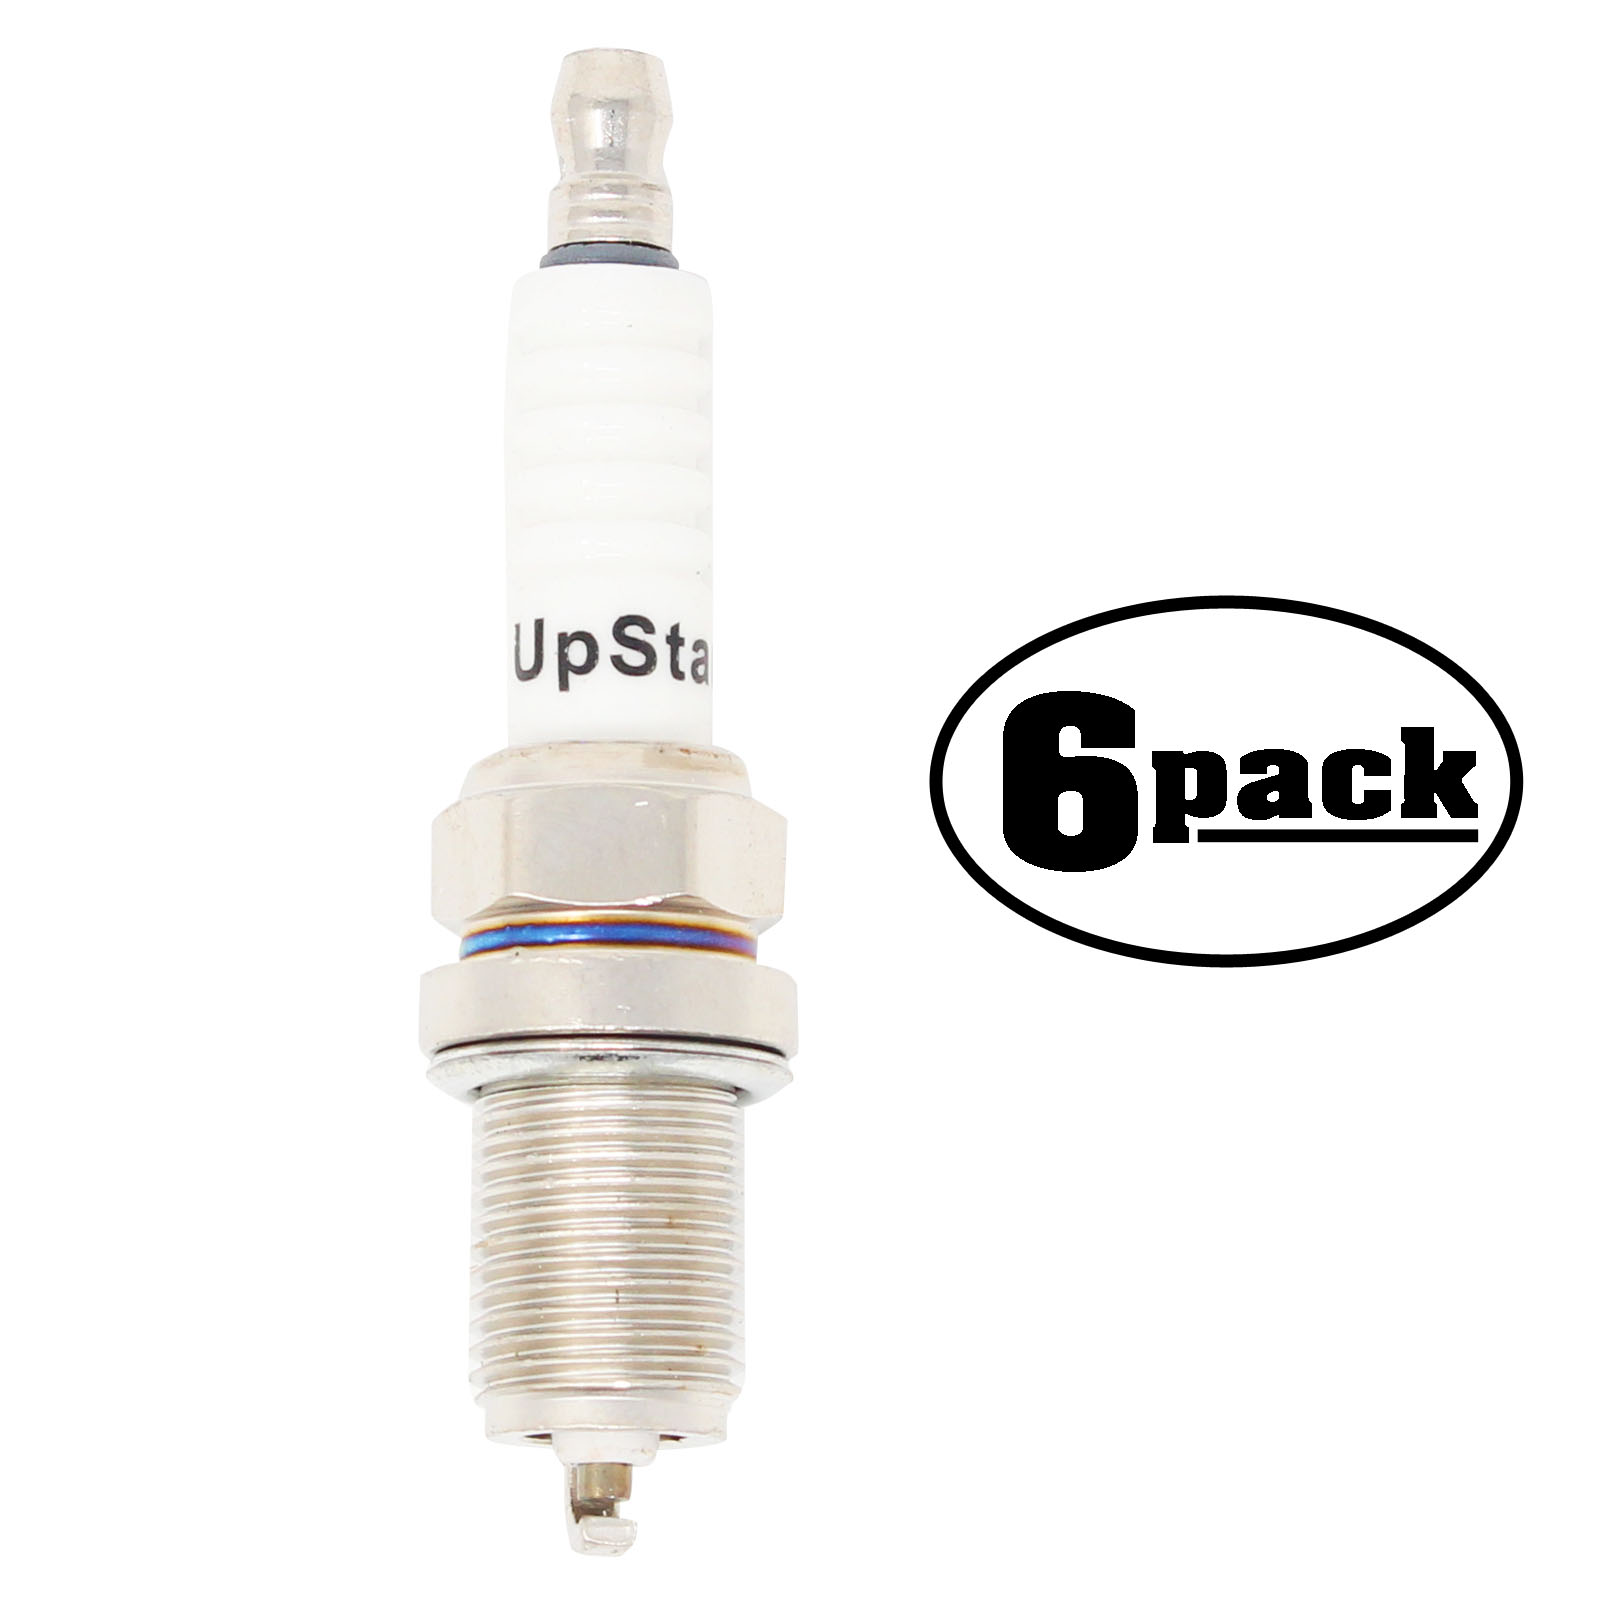 UpStart Components 6-Pack Compatible Spark Plug for CRAFTSMAN Snowblower with BRIGGS & STRATTON OHV Engines